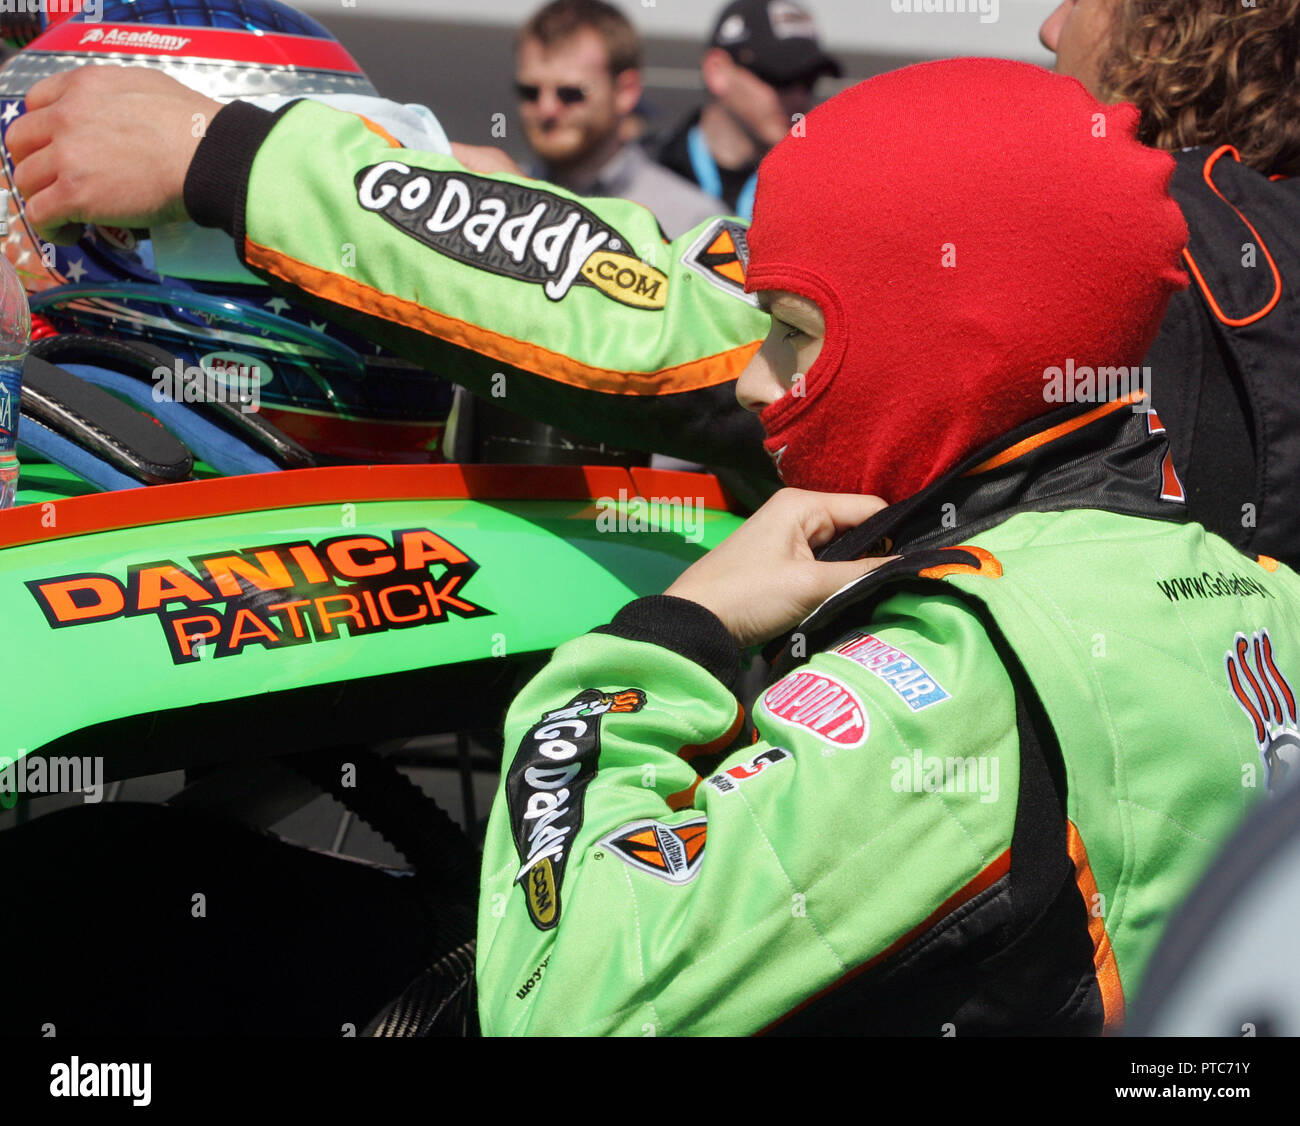 Danica Patrick readies herself for the start of the NASCAR Nationwide Drive4COPD 300 at Daytona International Speedway in Daytona Beach, Florida on February 19, 2011. Stock Photo